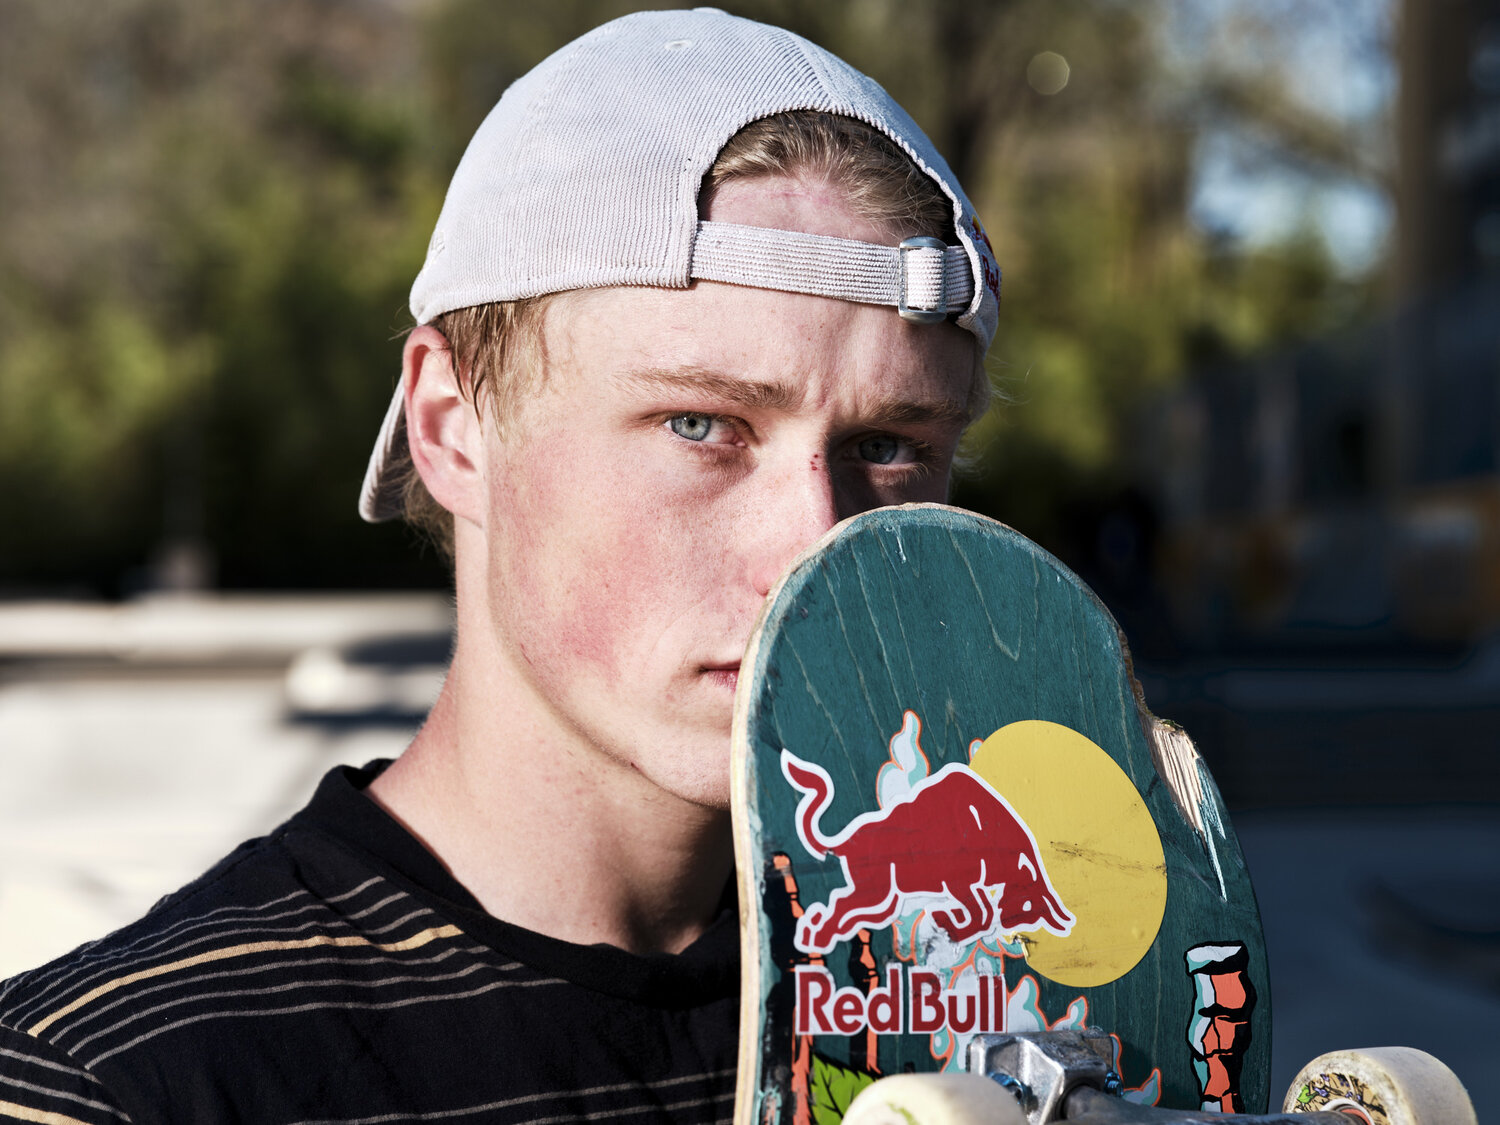 I made this portrait of Red Bull athlete Jake Wooten at House Park in Austin, TX just before the pandemic hit the US.